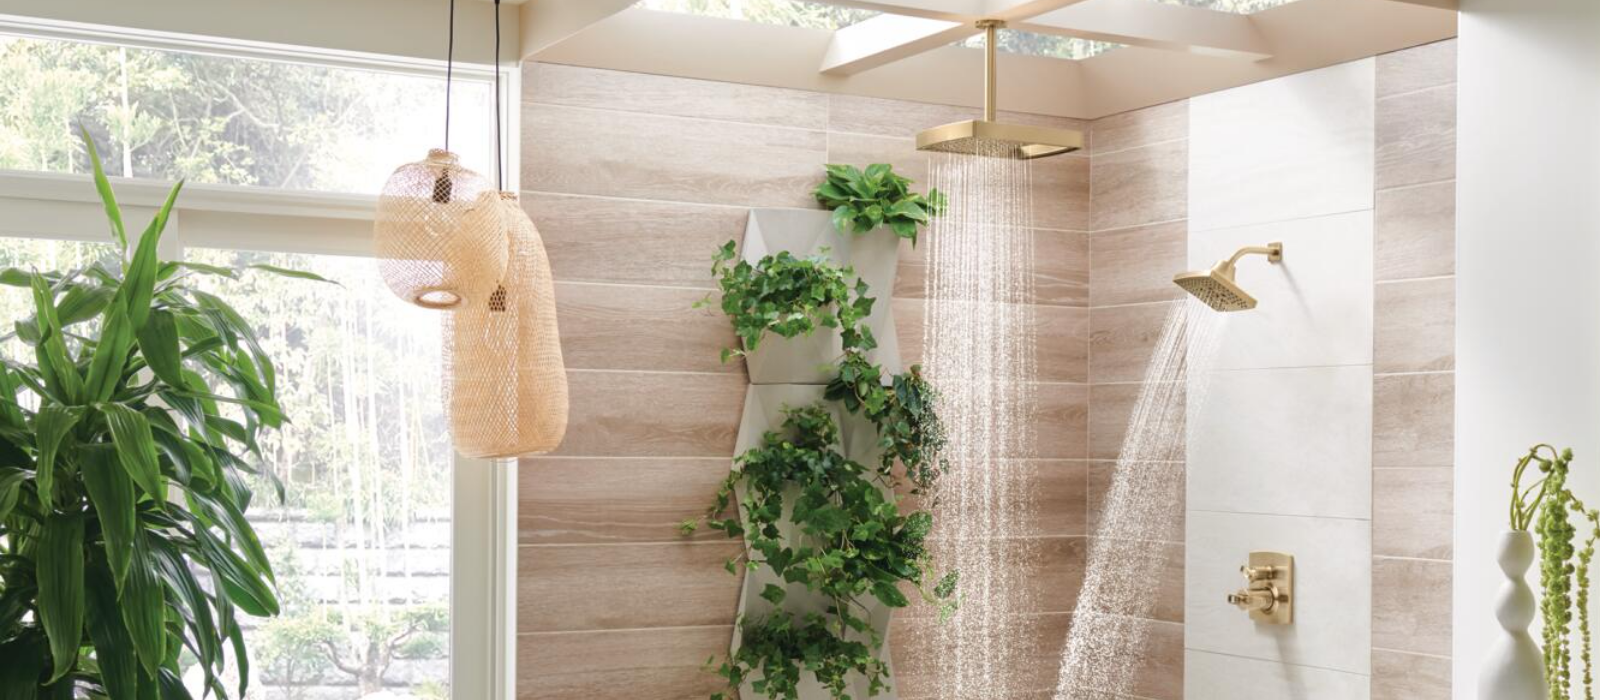 All Shower Components
